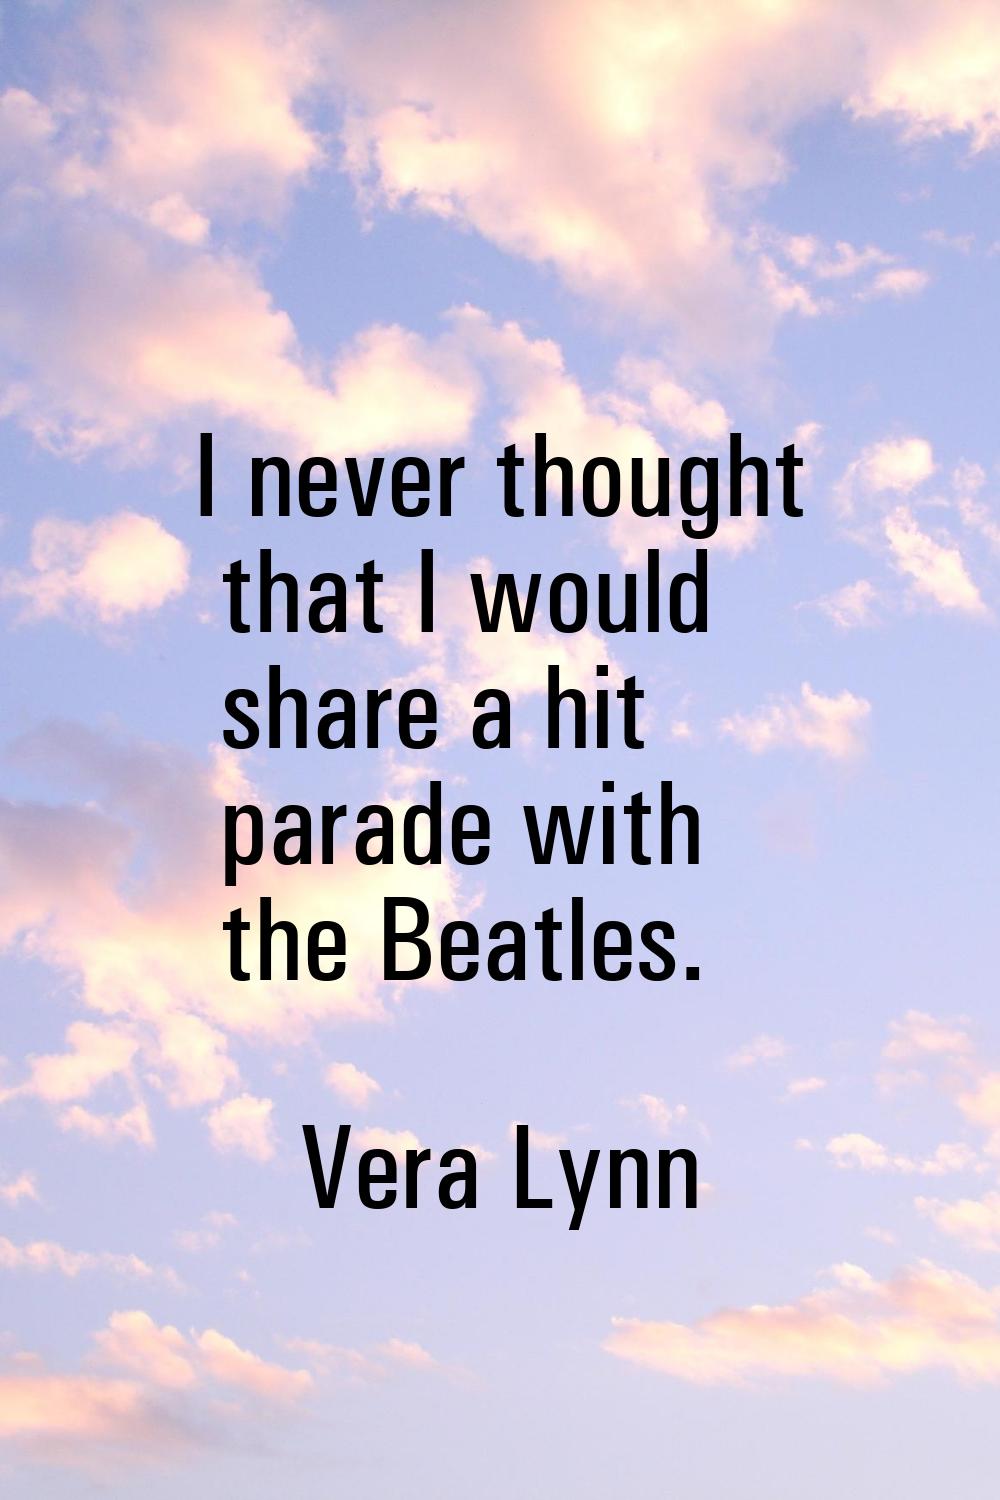 I never thought that I would share a hit parade with the Beatles.